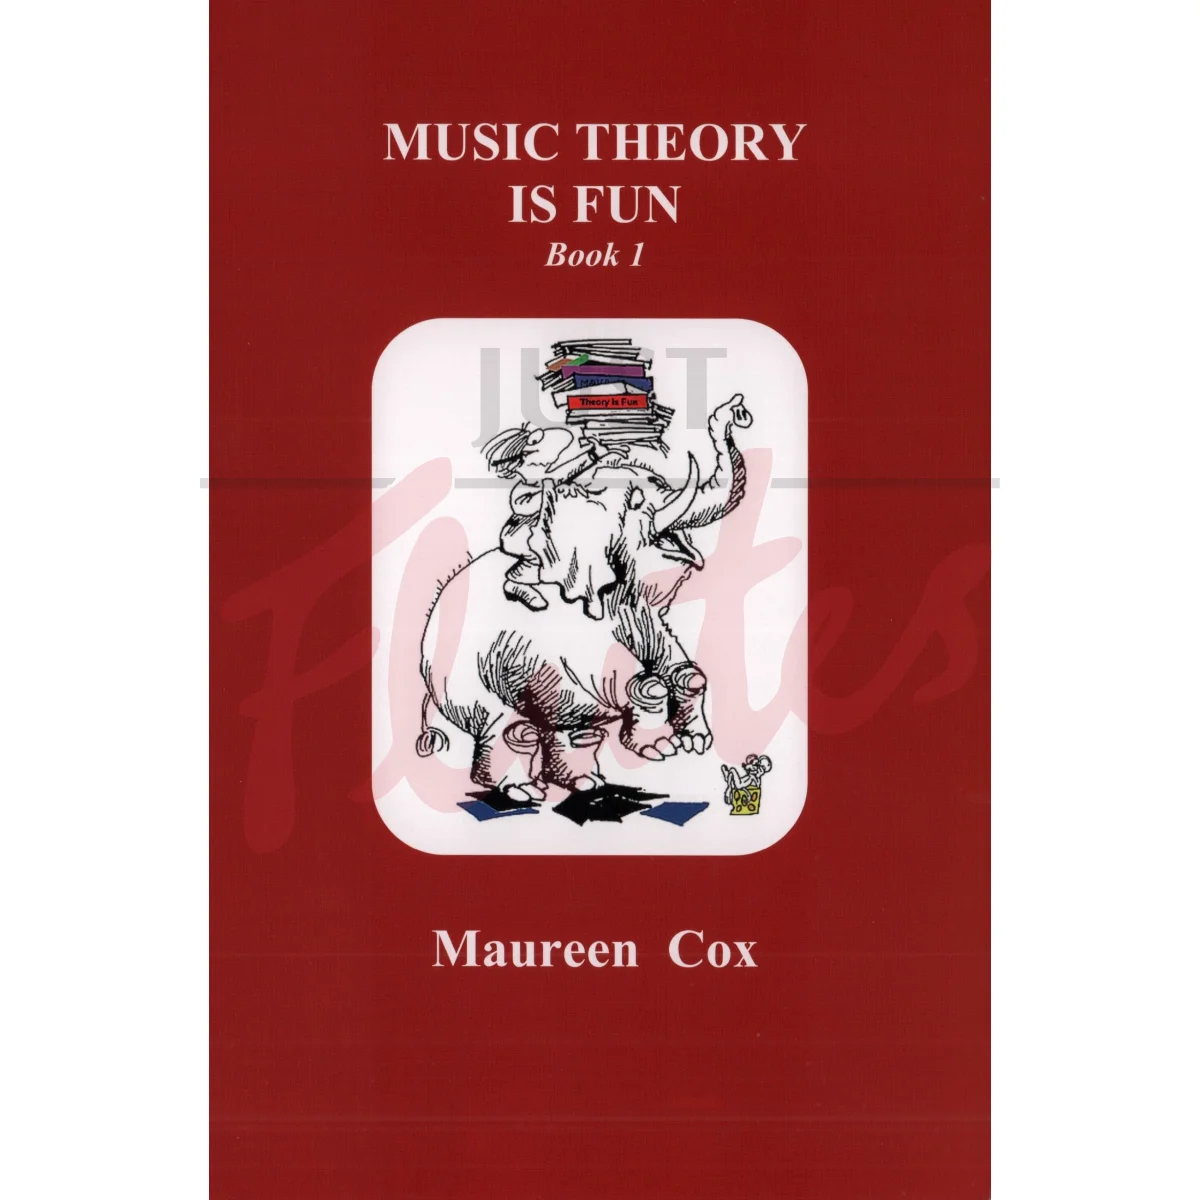 Music Theory is Fun Book 1 (Revised)